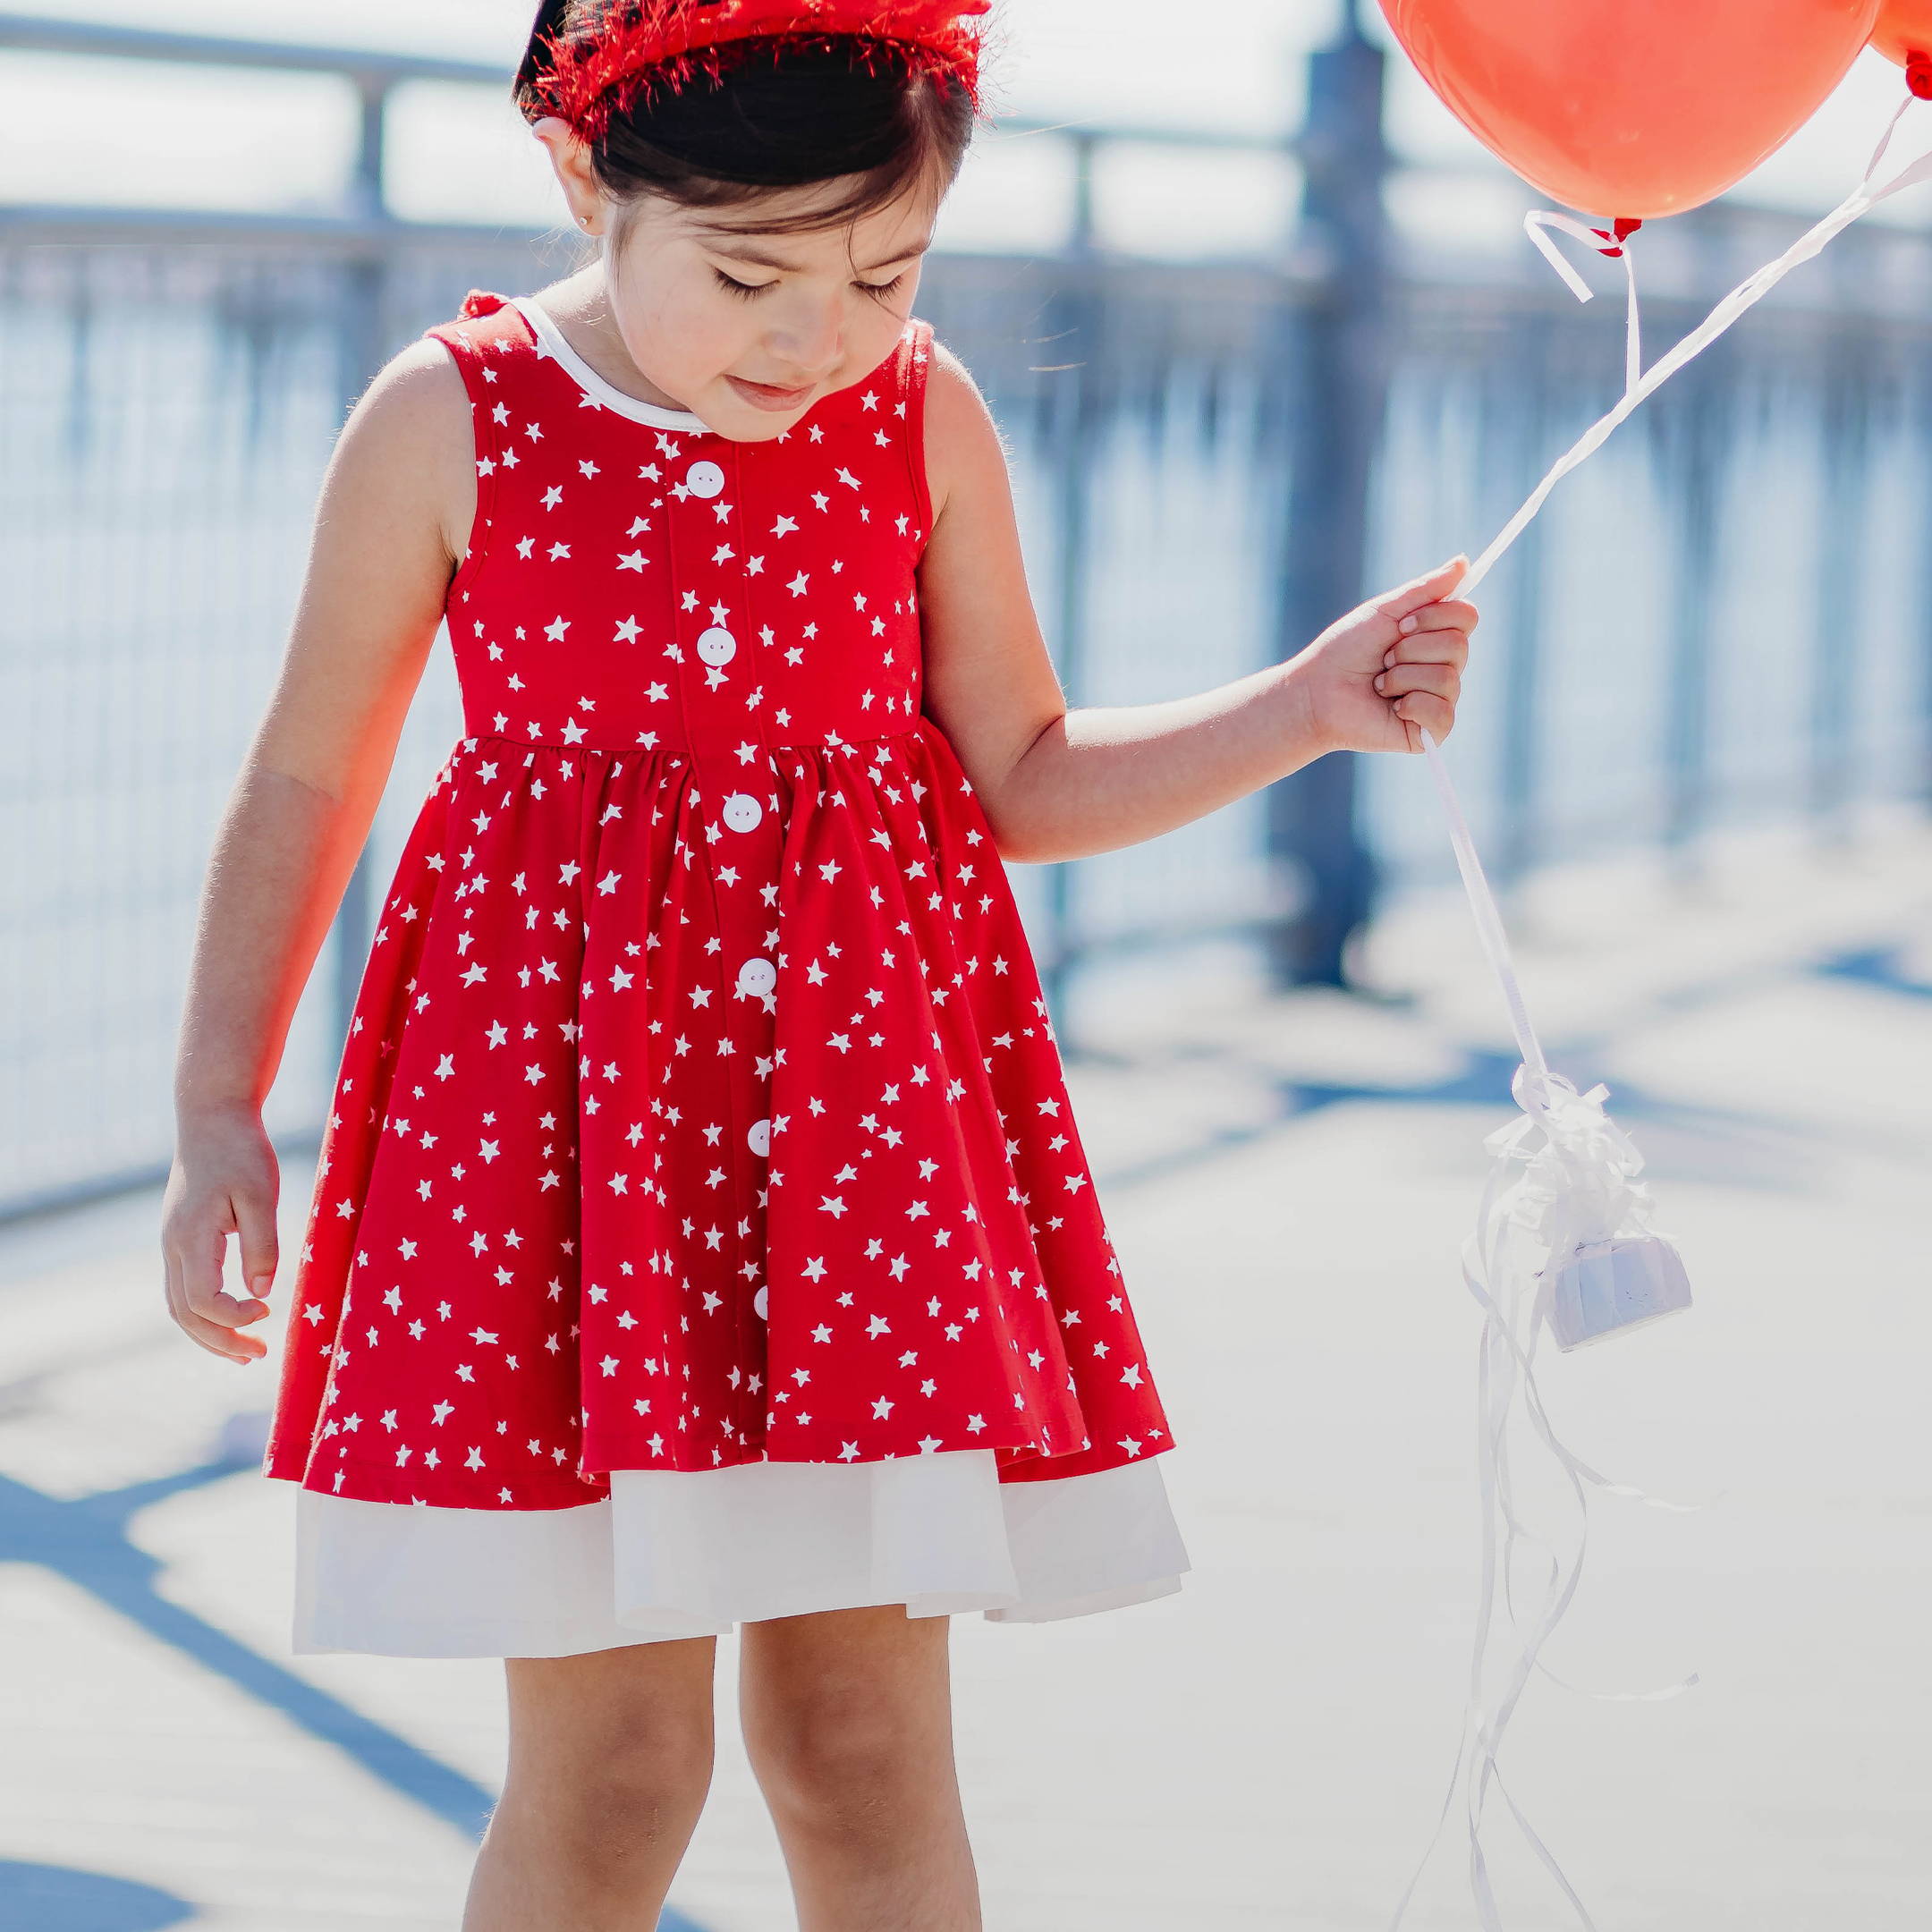 girl in red star patterned dress holding red balloons